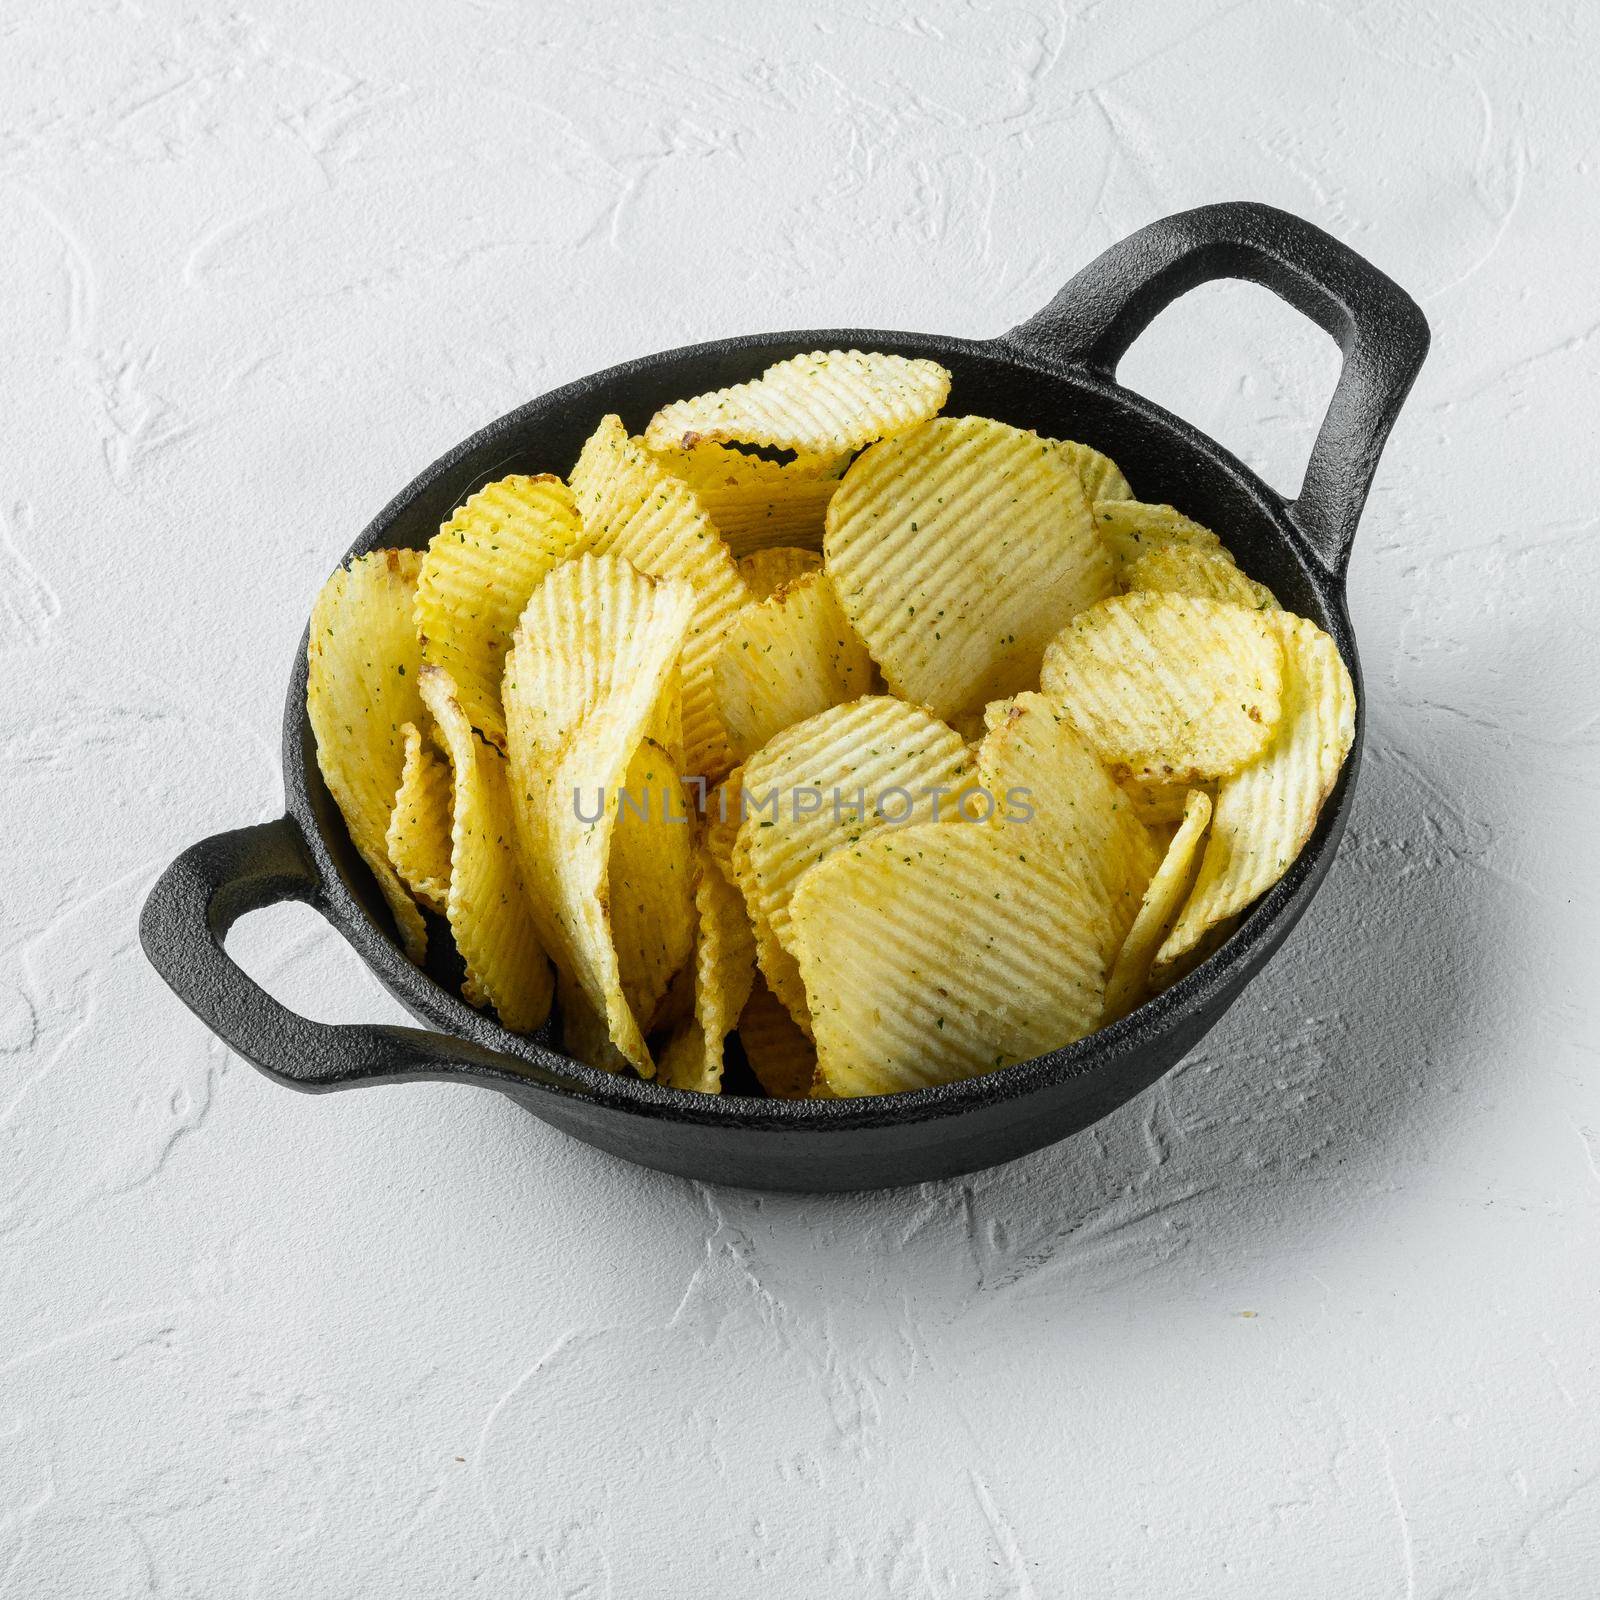 Crispy potato chips. Slices of potato, roasted with sea salt set, in cast iron frying pan, on white stone surface, square format